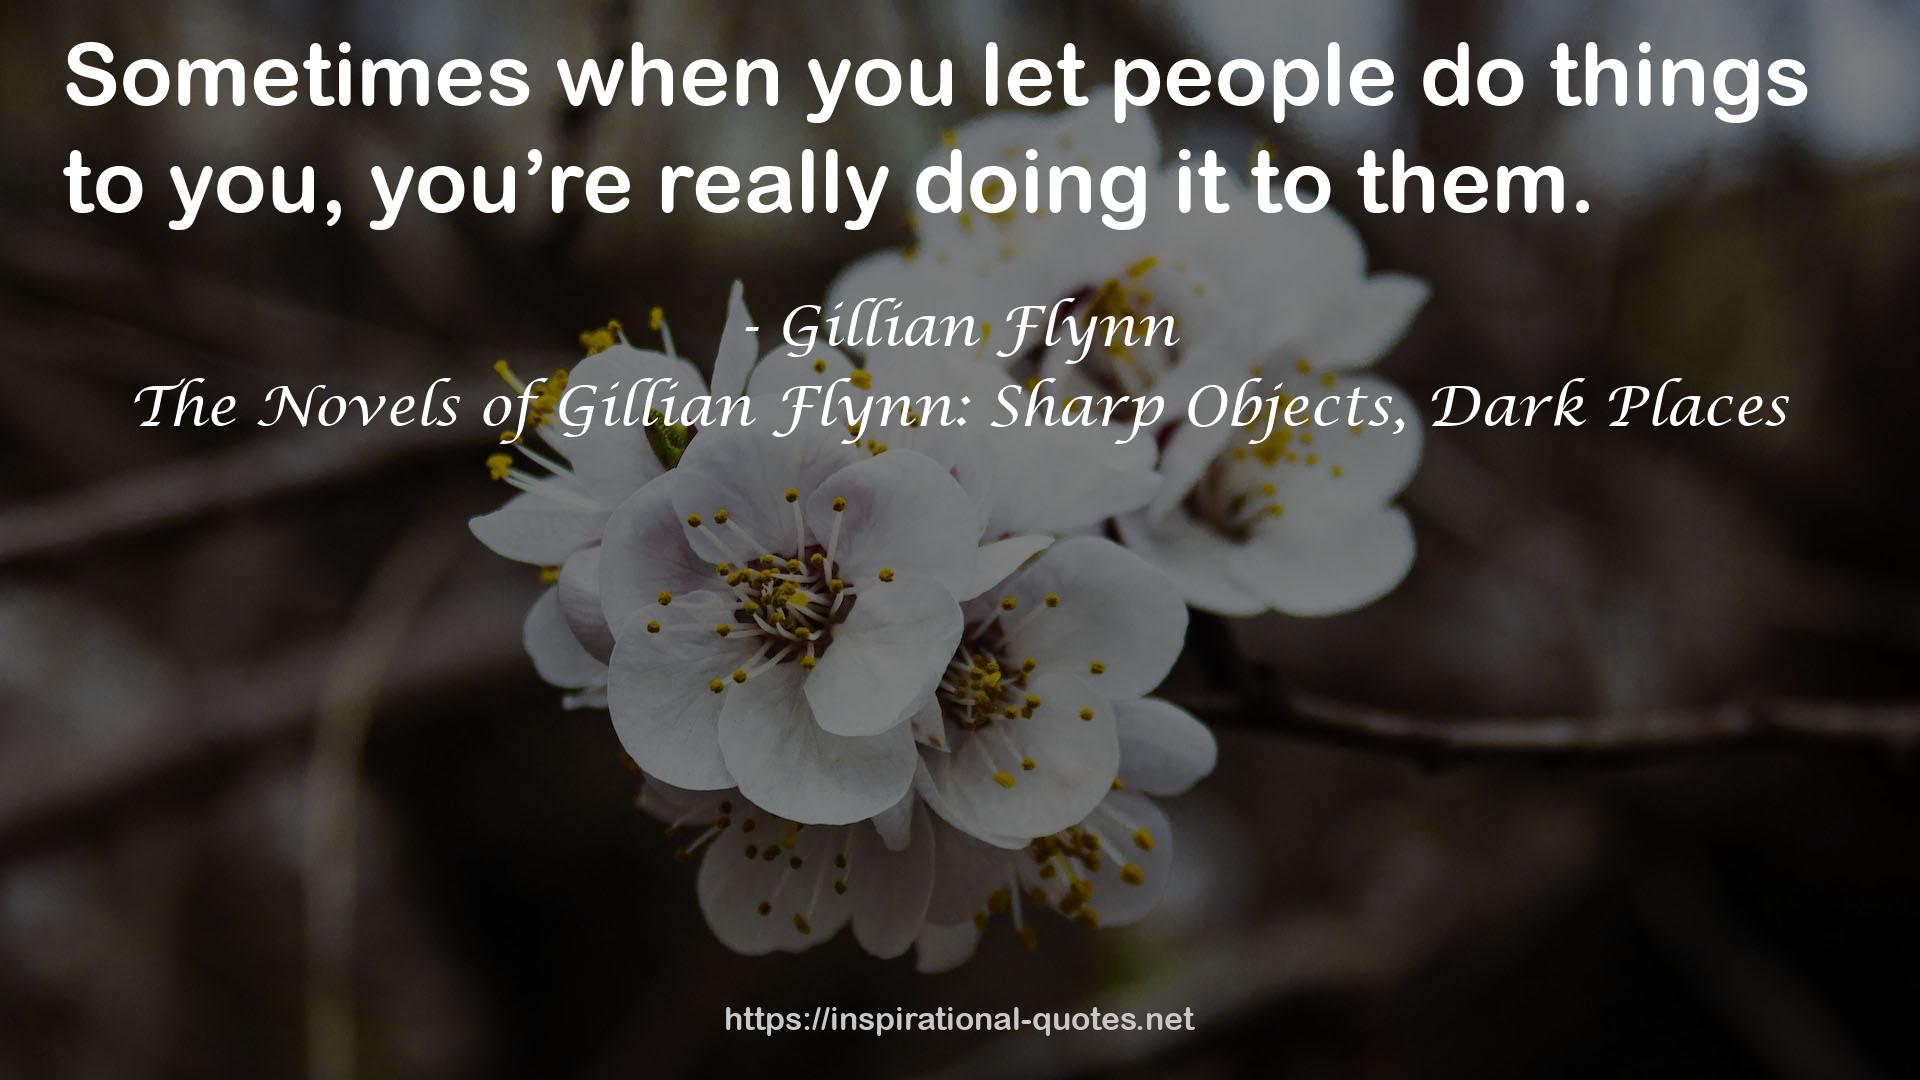 The Novels of Gillian Flynn: Sharp Objects, Dark Places QUOTES